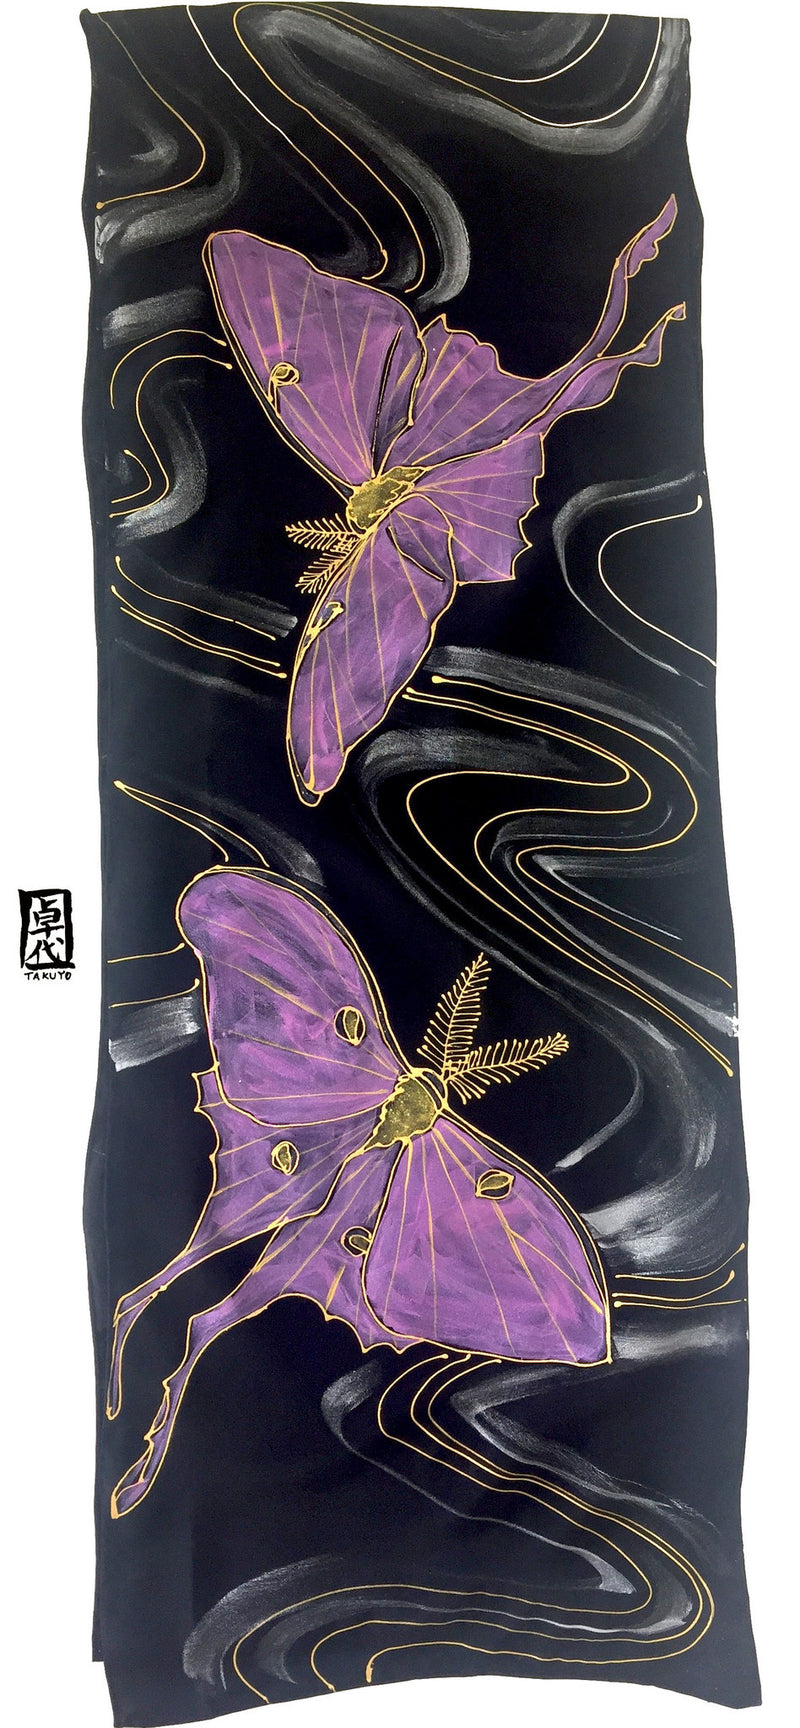 Hand Painted Silk Scarf, Silver Moon and Pink Luna Moth Scarf, Black Silk Scarf, Large Silk Scarf, Silk Scarves Takuyo, 14x72 inches. - Silk Scarves Takuyo